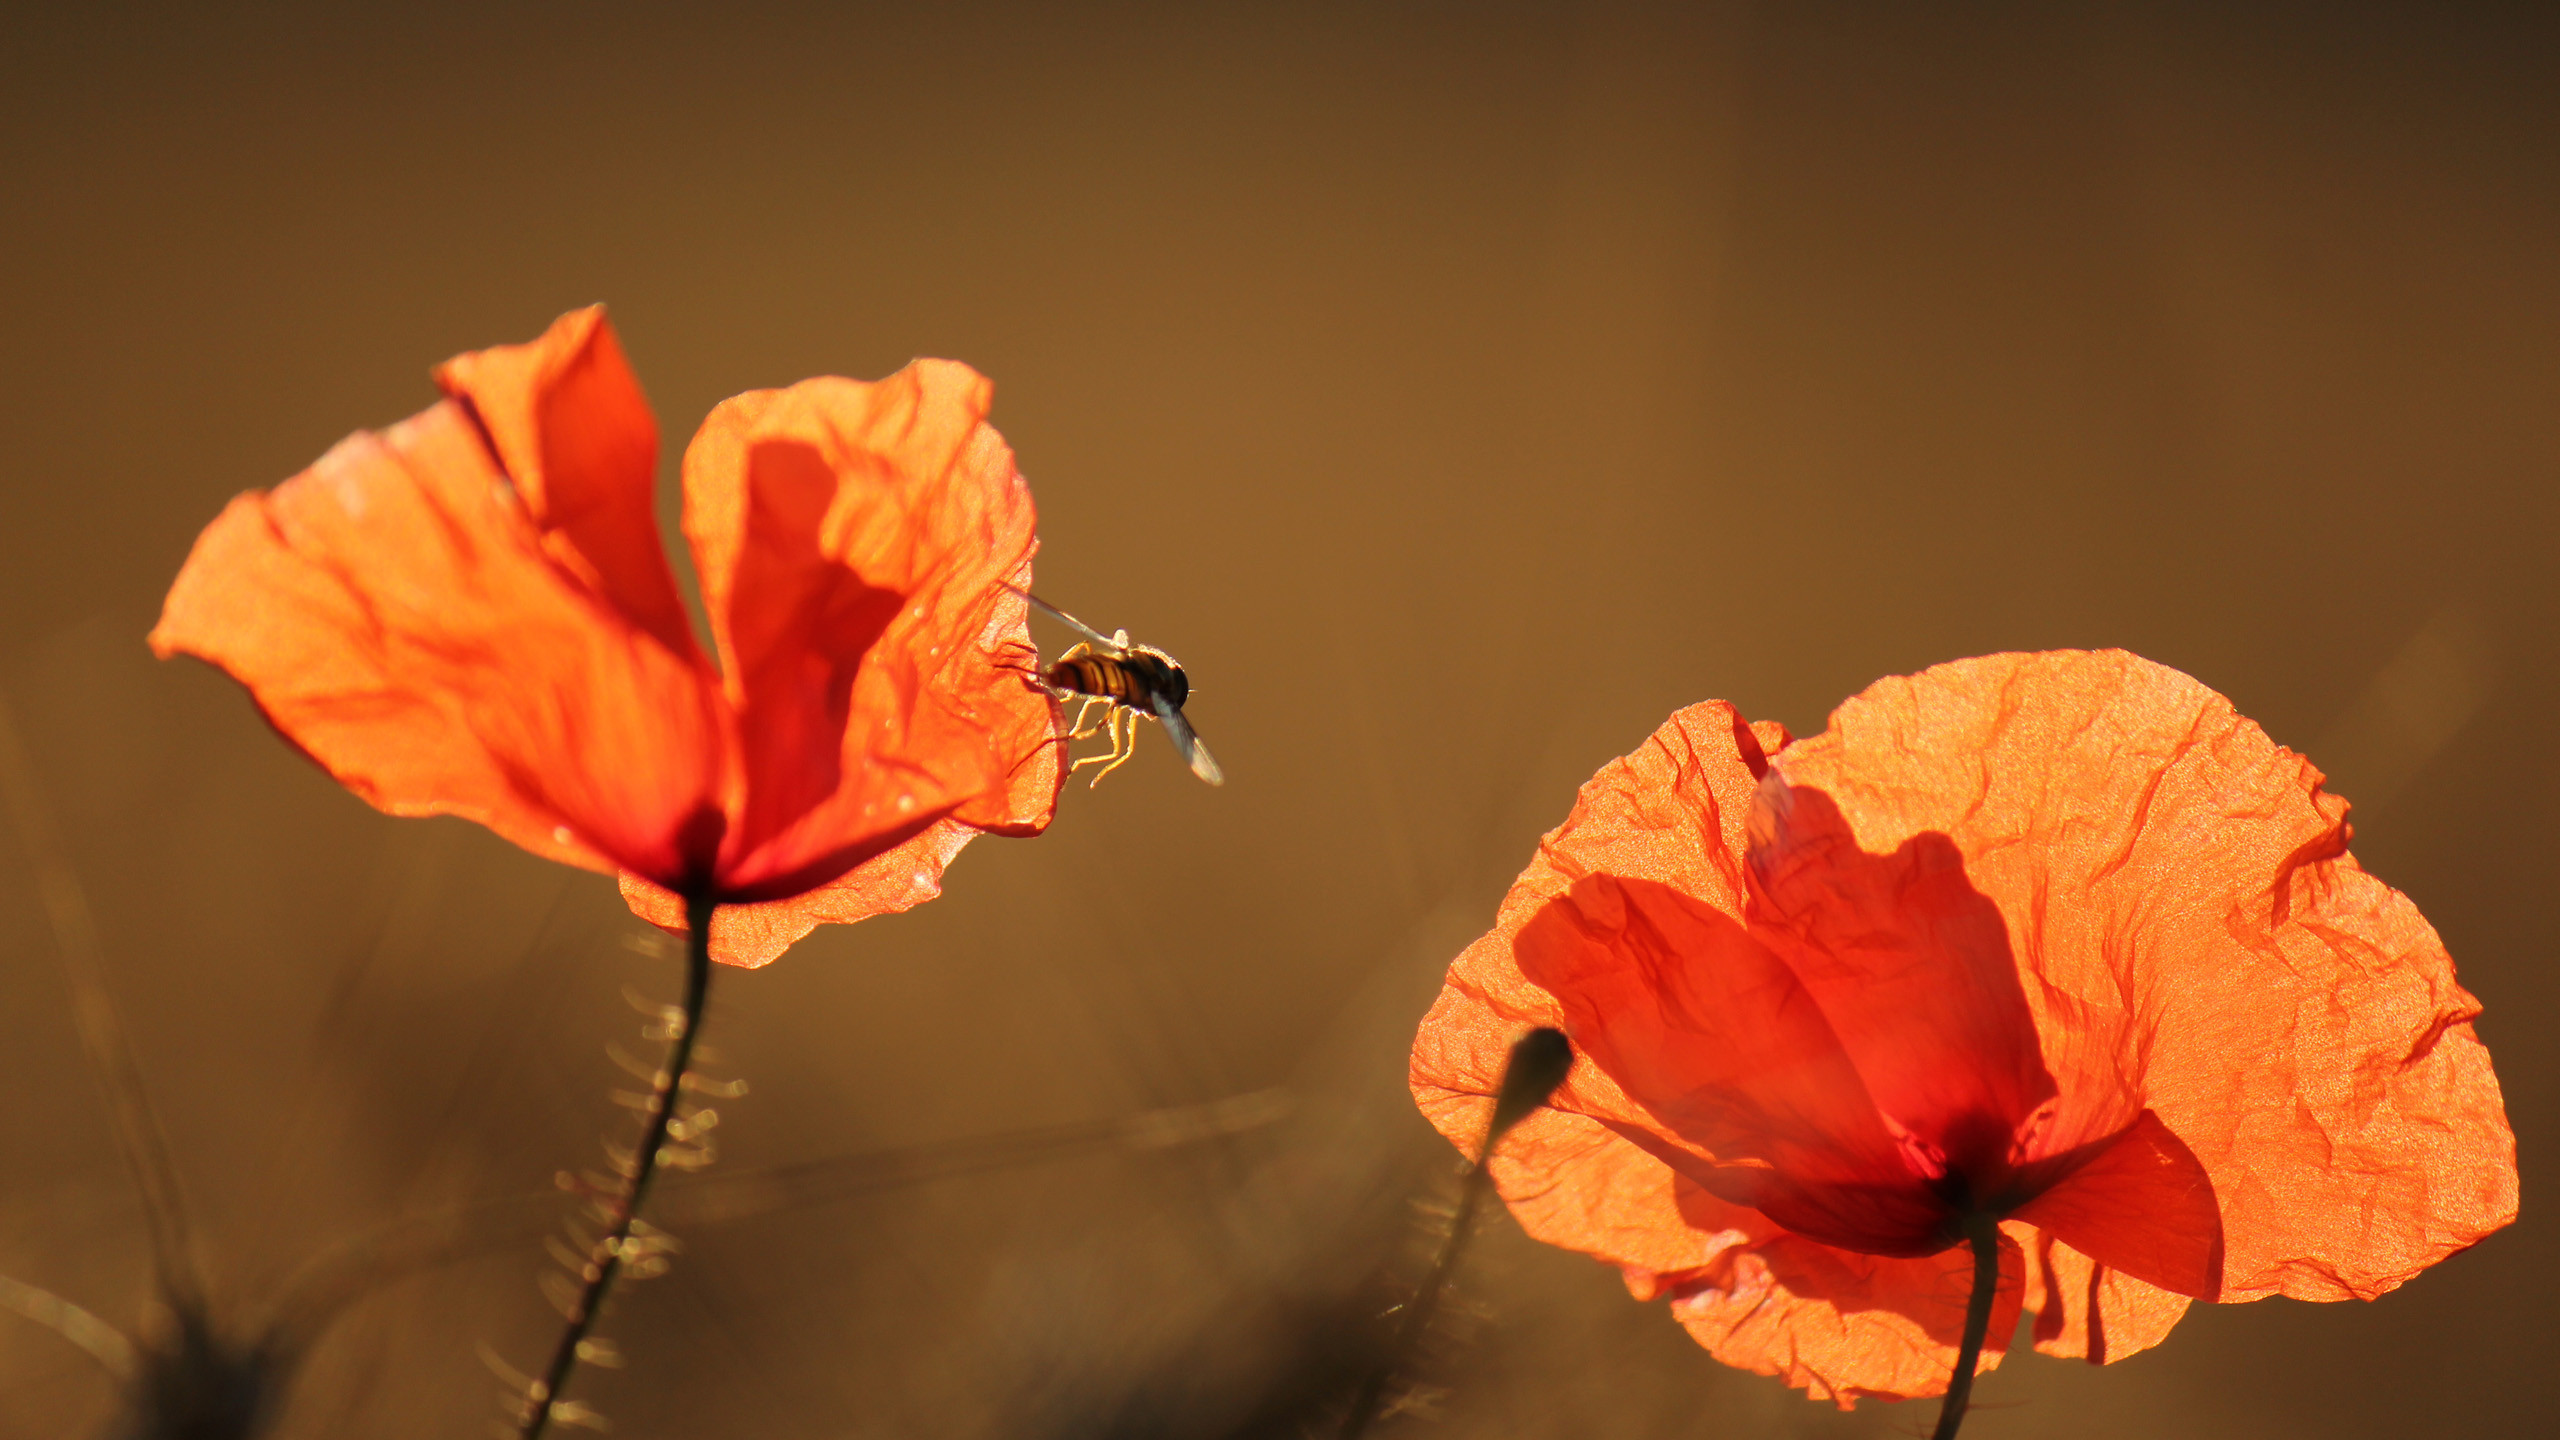 2560x1440 Bild: Red Poppy & Summer Sunshine wallpapers and stock photos. Â«